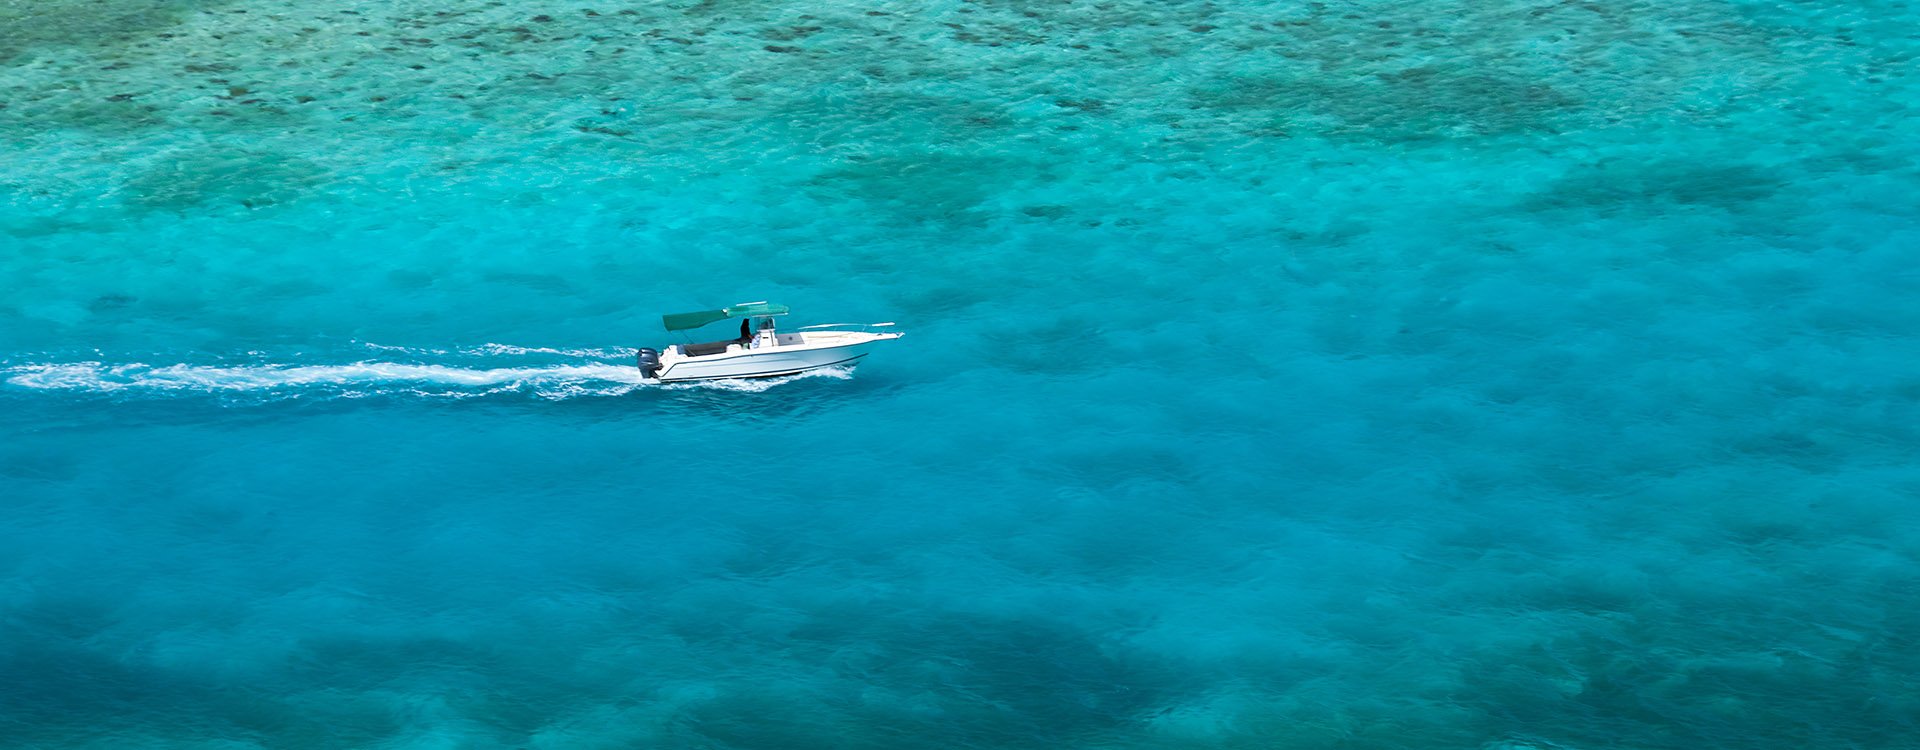 Small power boat on turquoise Caribbean Sea of The british virgin islands